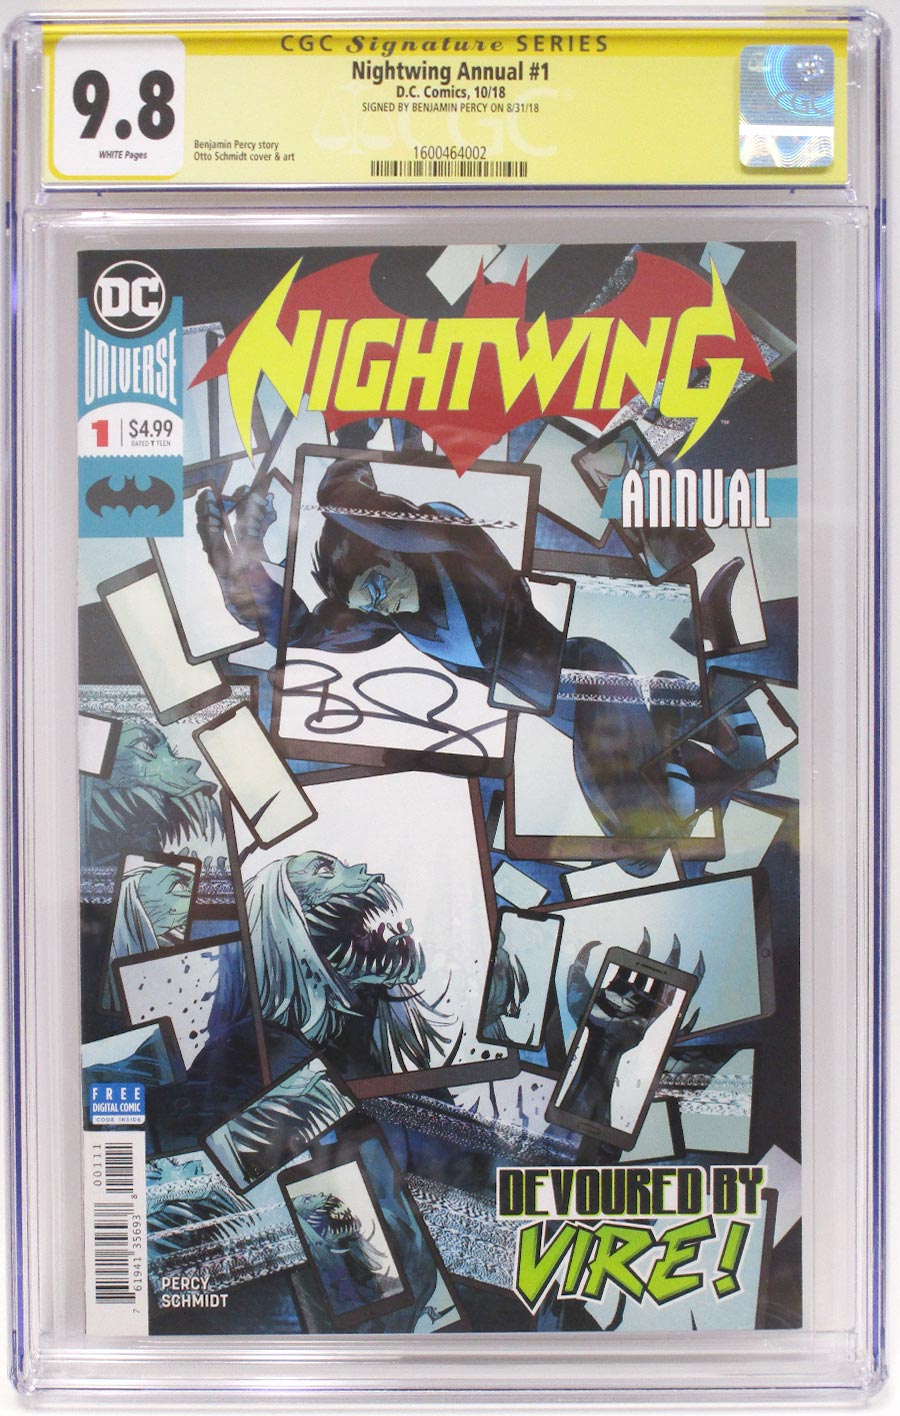 Nightwing Vol 4 Annual #1 Cover D Regular Otto Schimdt Cover CGC Signature Series 9.8 Signed By Benjamin Percy